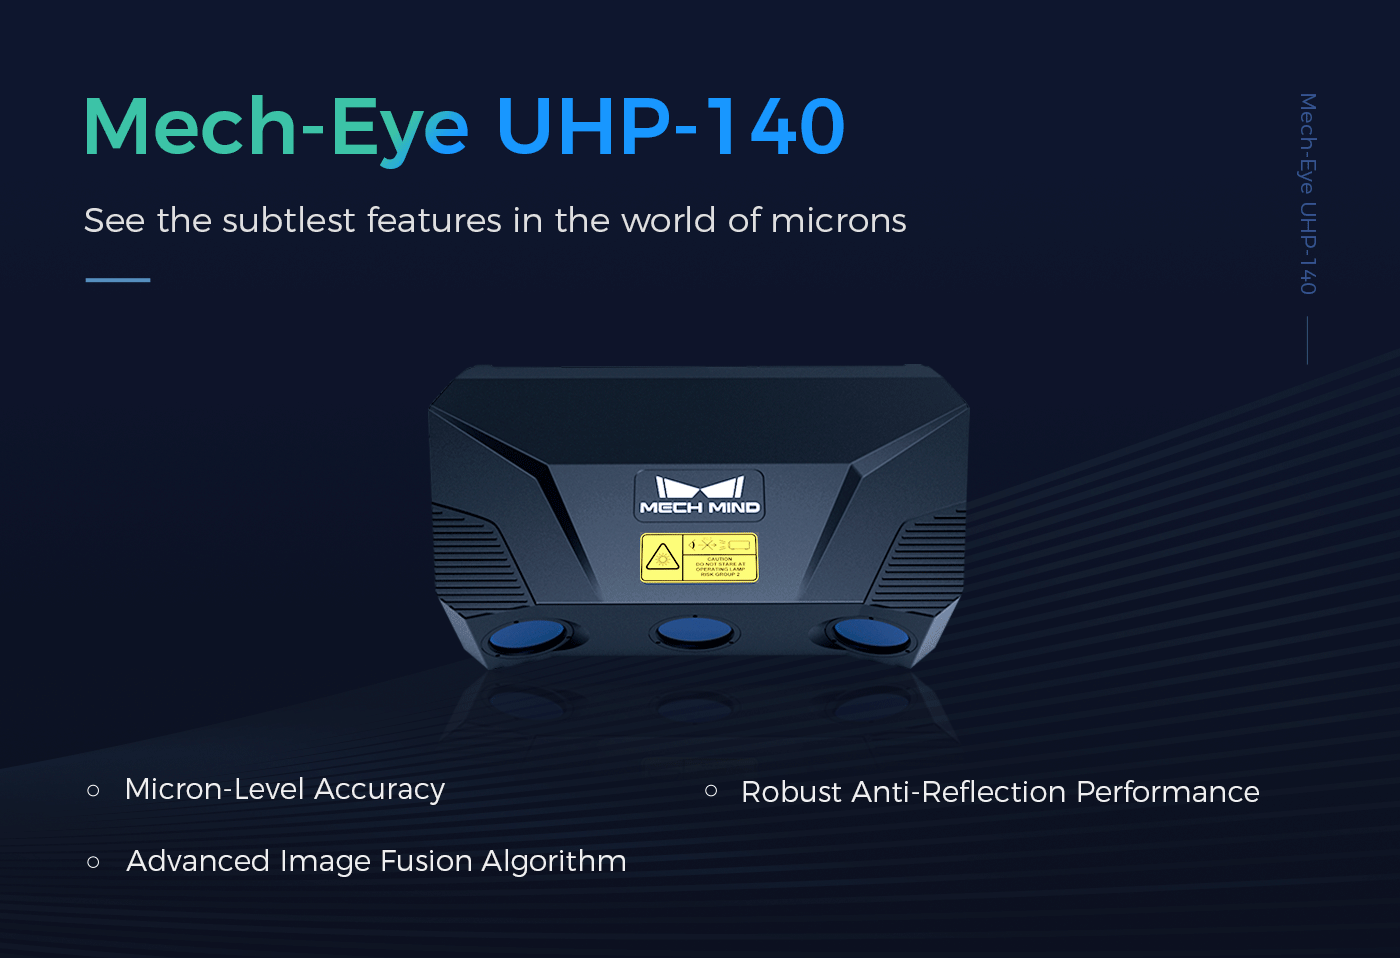  Release of Mech-Eye UHP-140 — the All-New 3D Camera with Micron-Level Accuracy for Inspection and Measurement in the Automotive Industry